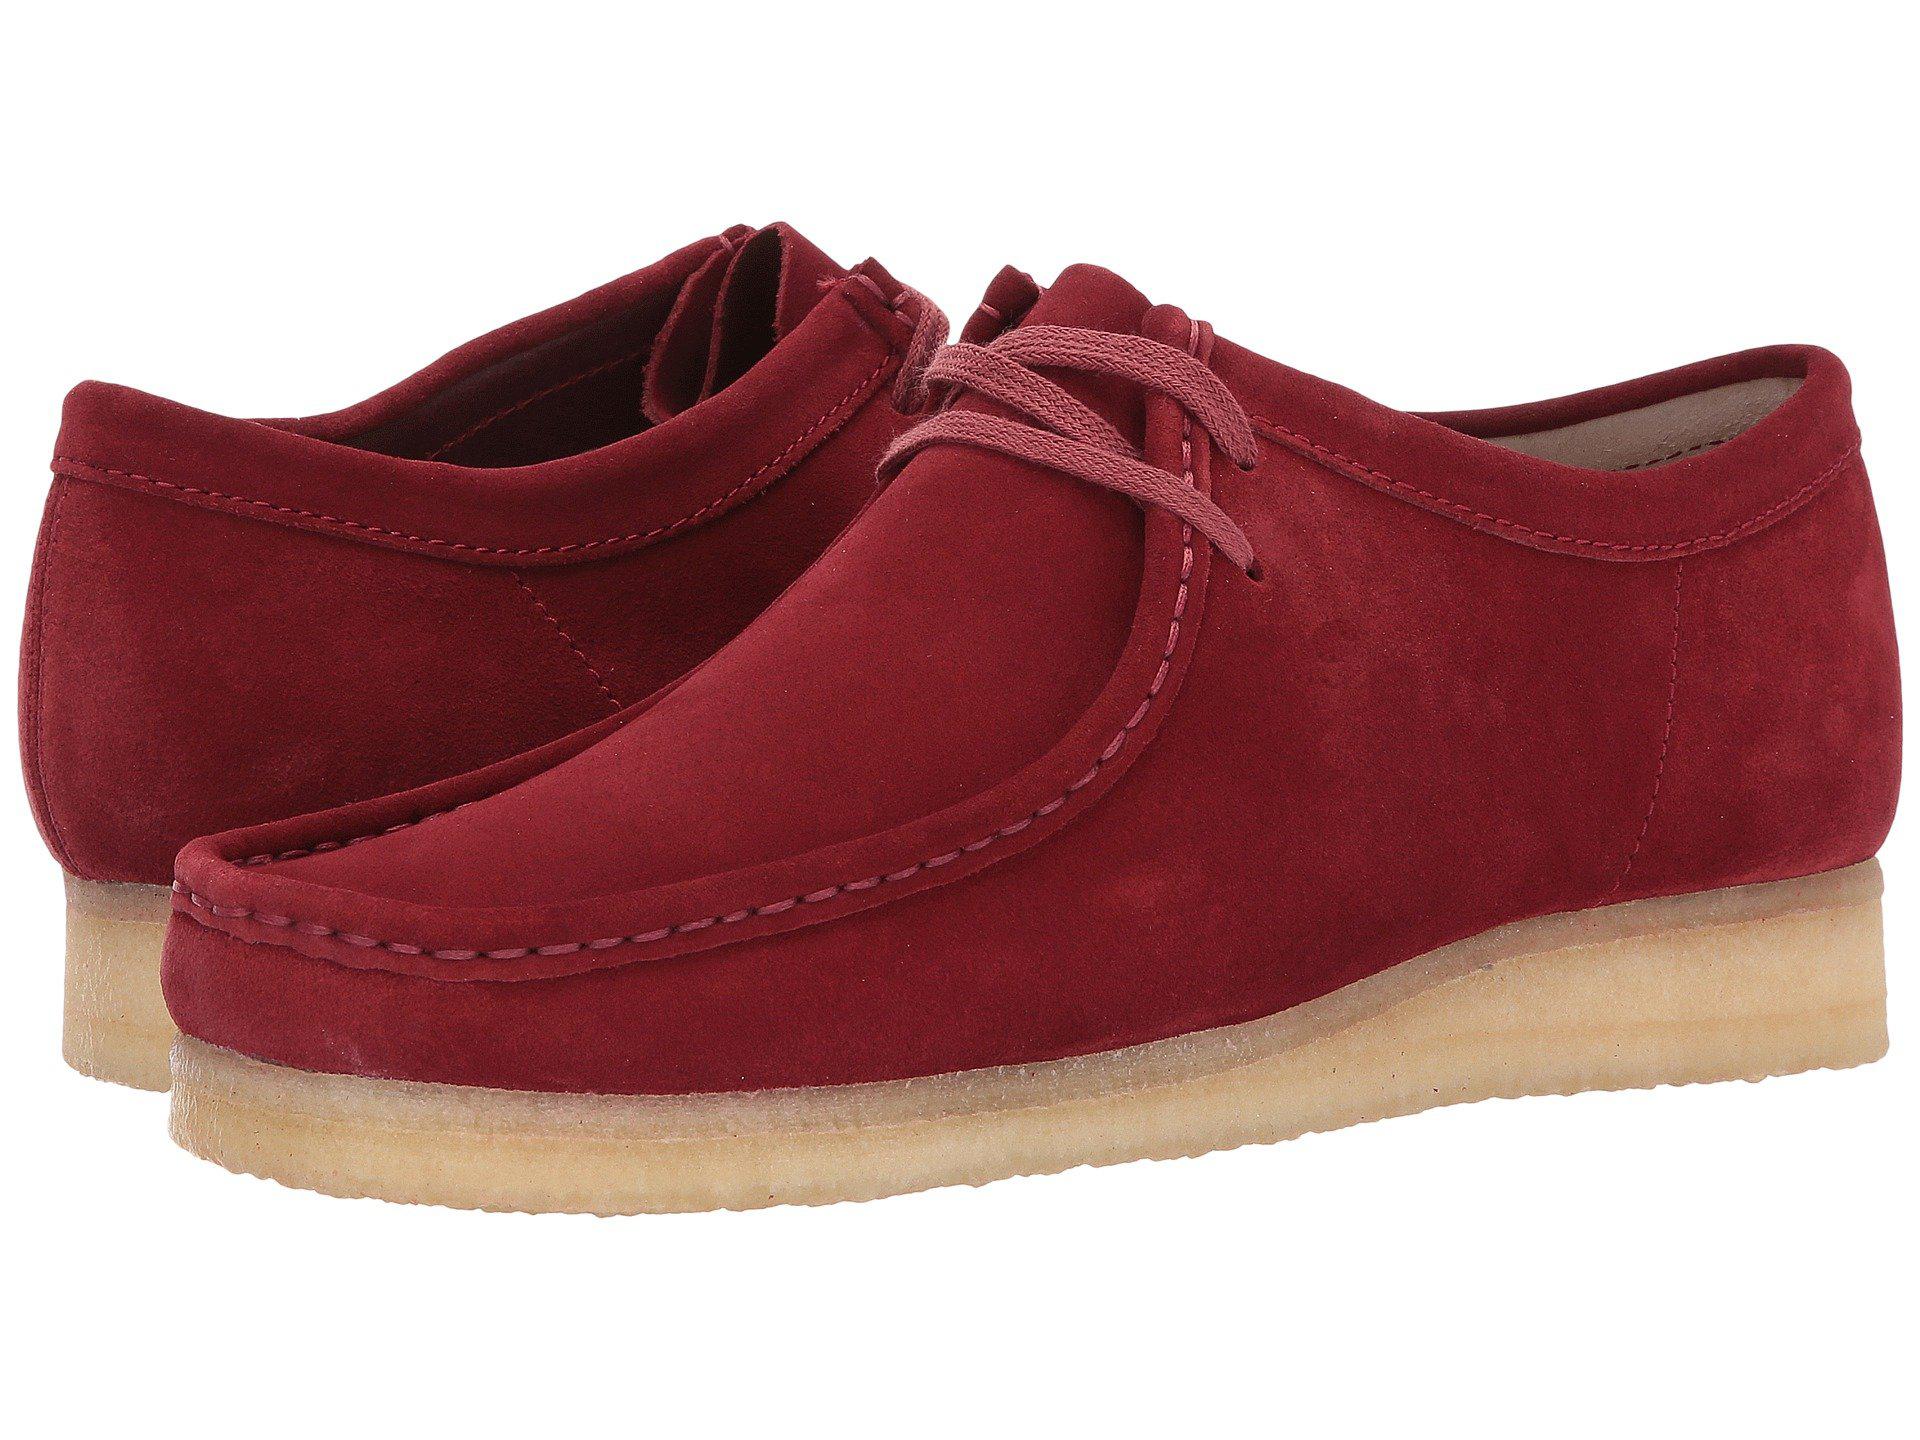 Red Wallabees Sweden, SAVE 46% - horiconphoenix.com